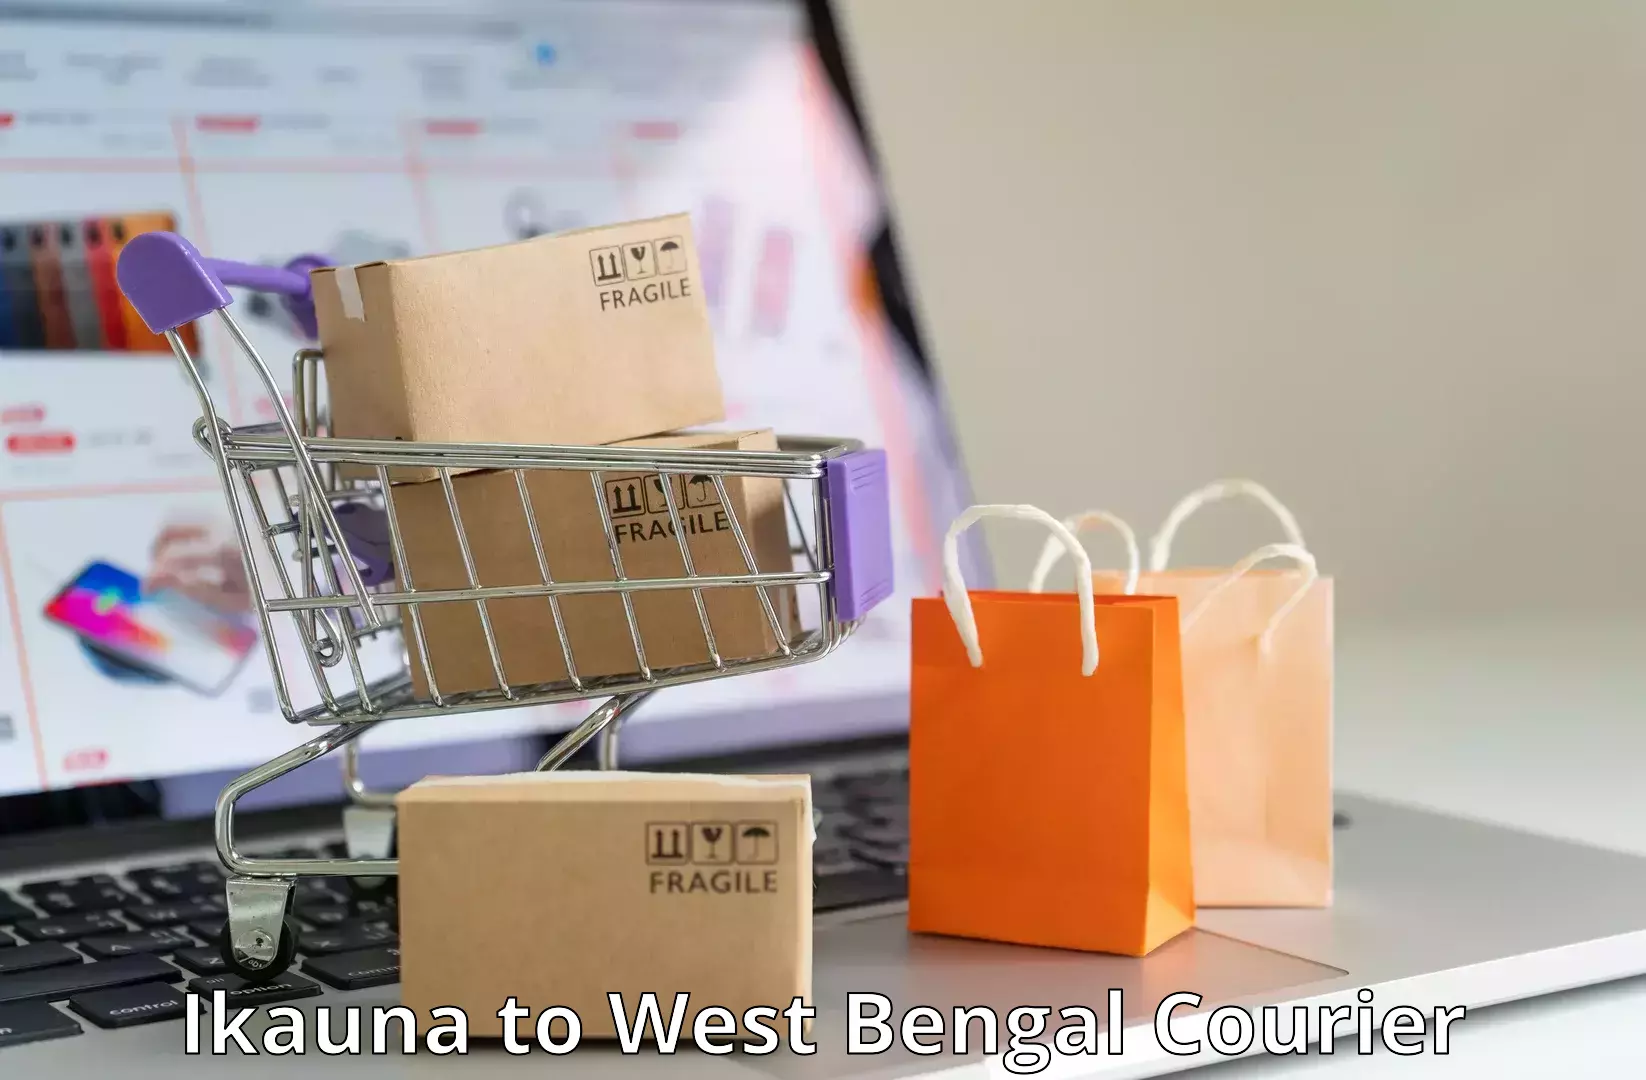 Weekend courier service in Ikauna to Fatepur